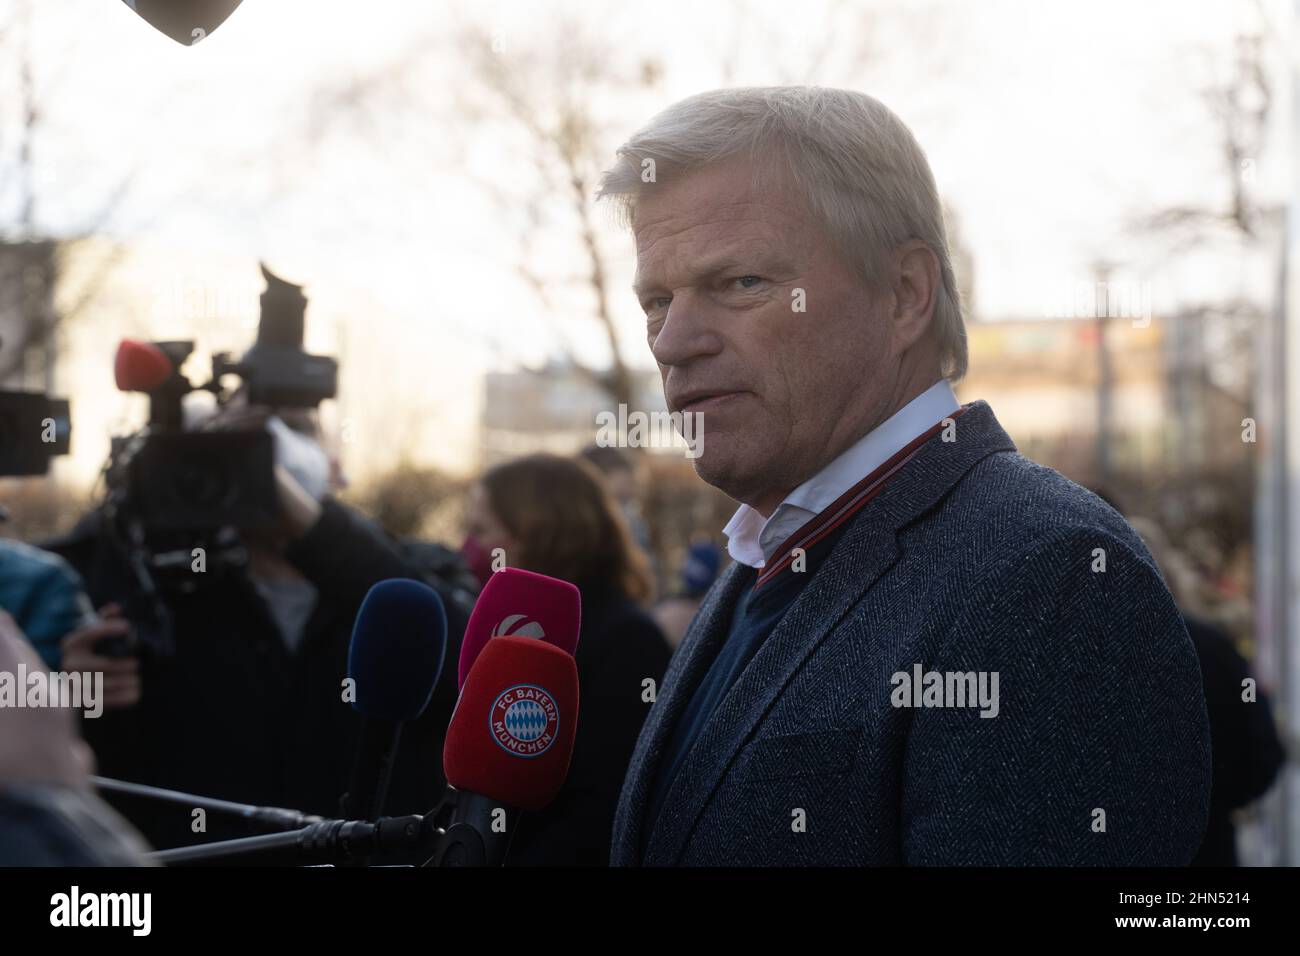 Munich, Germany. 14th Feb, 2022. Oliver Kahn getting interviewed. On February 14, 2022, the vaccination tram was presented in Munich, Germany. Participants were: Minister of State Klaus Holetschek, Mayor Verena Dietel, Oliver Kahn and Beatrix Zurek. (Photo by Alexander Pohl/Sipa USA) Credit: Sipa USA/Alamy Live News Stock Photo